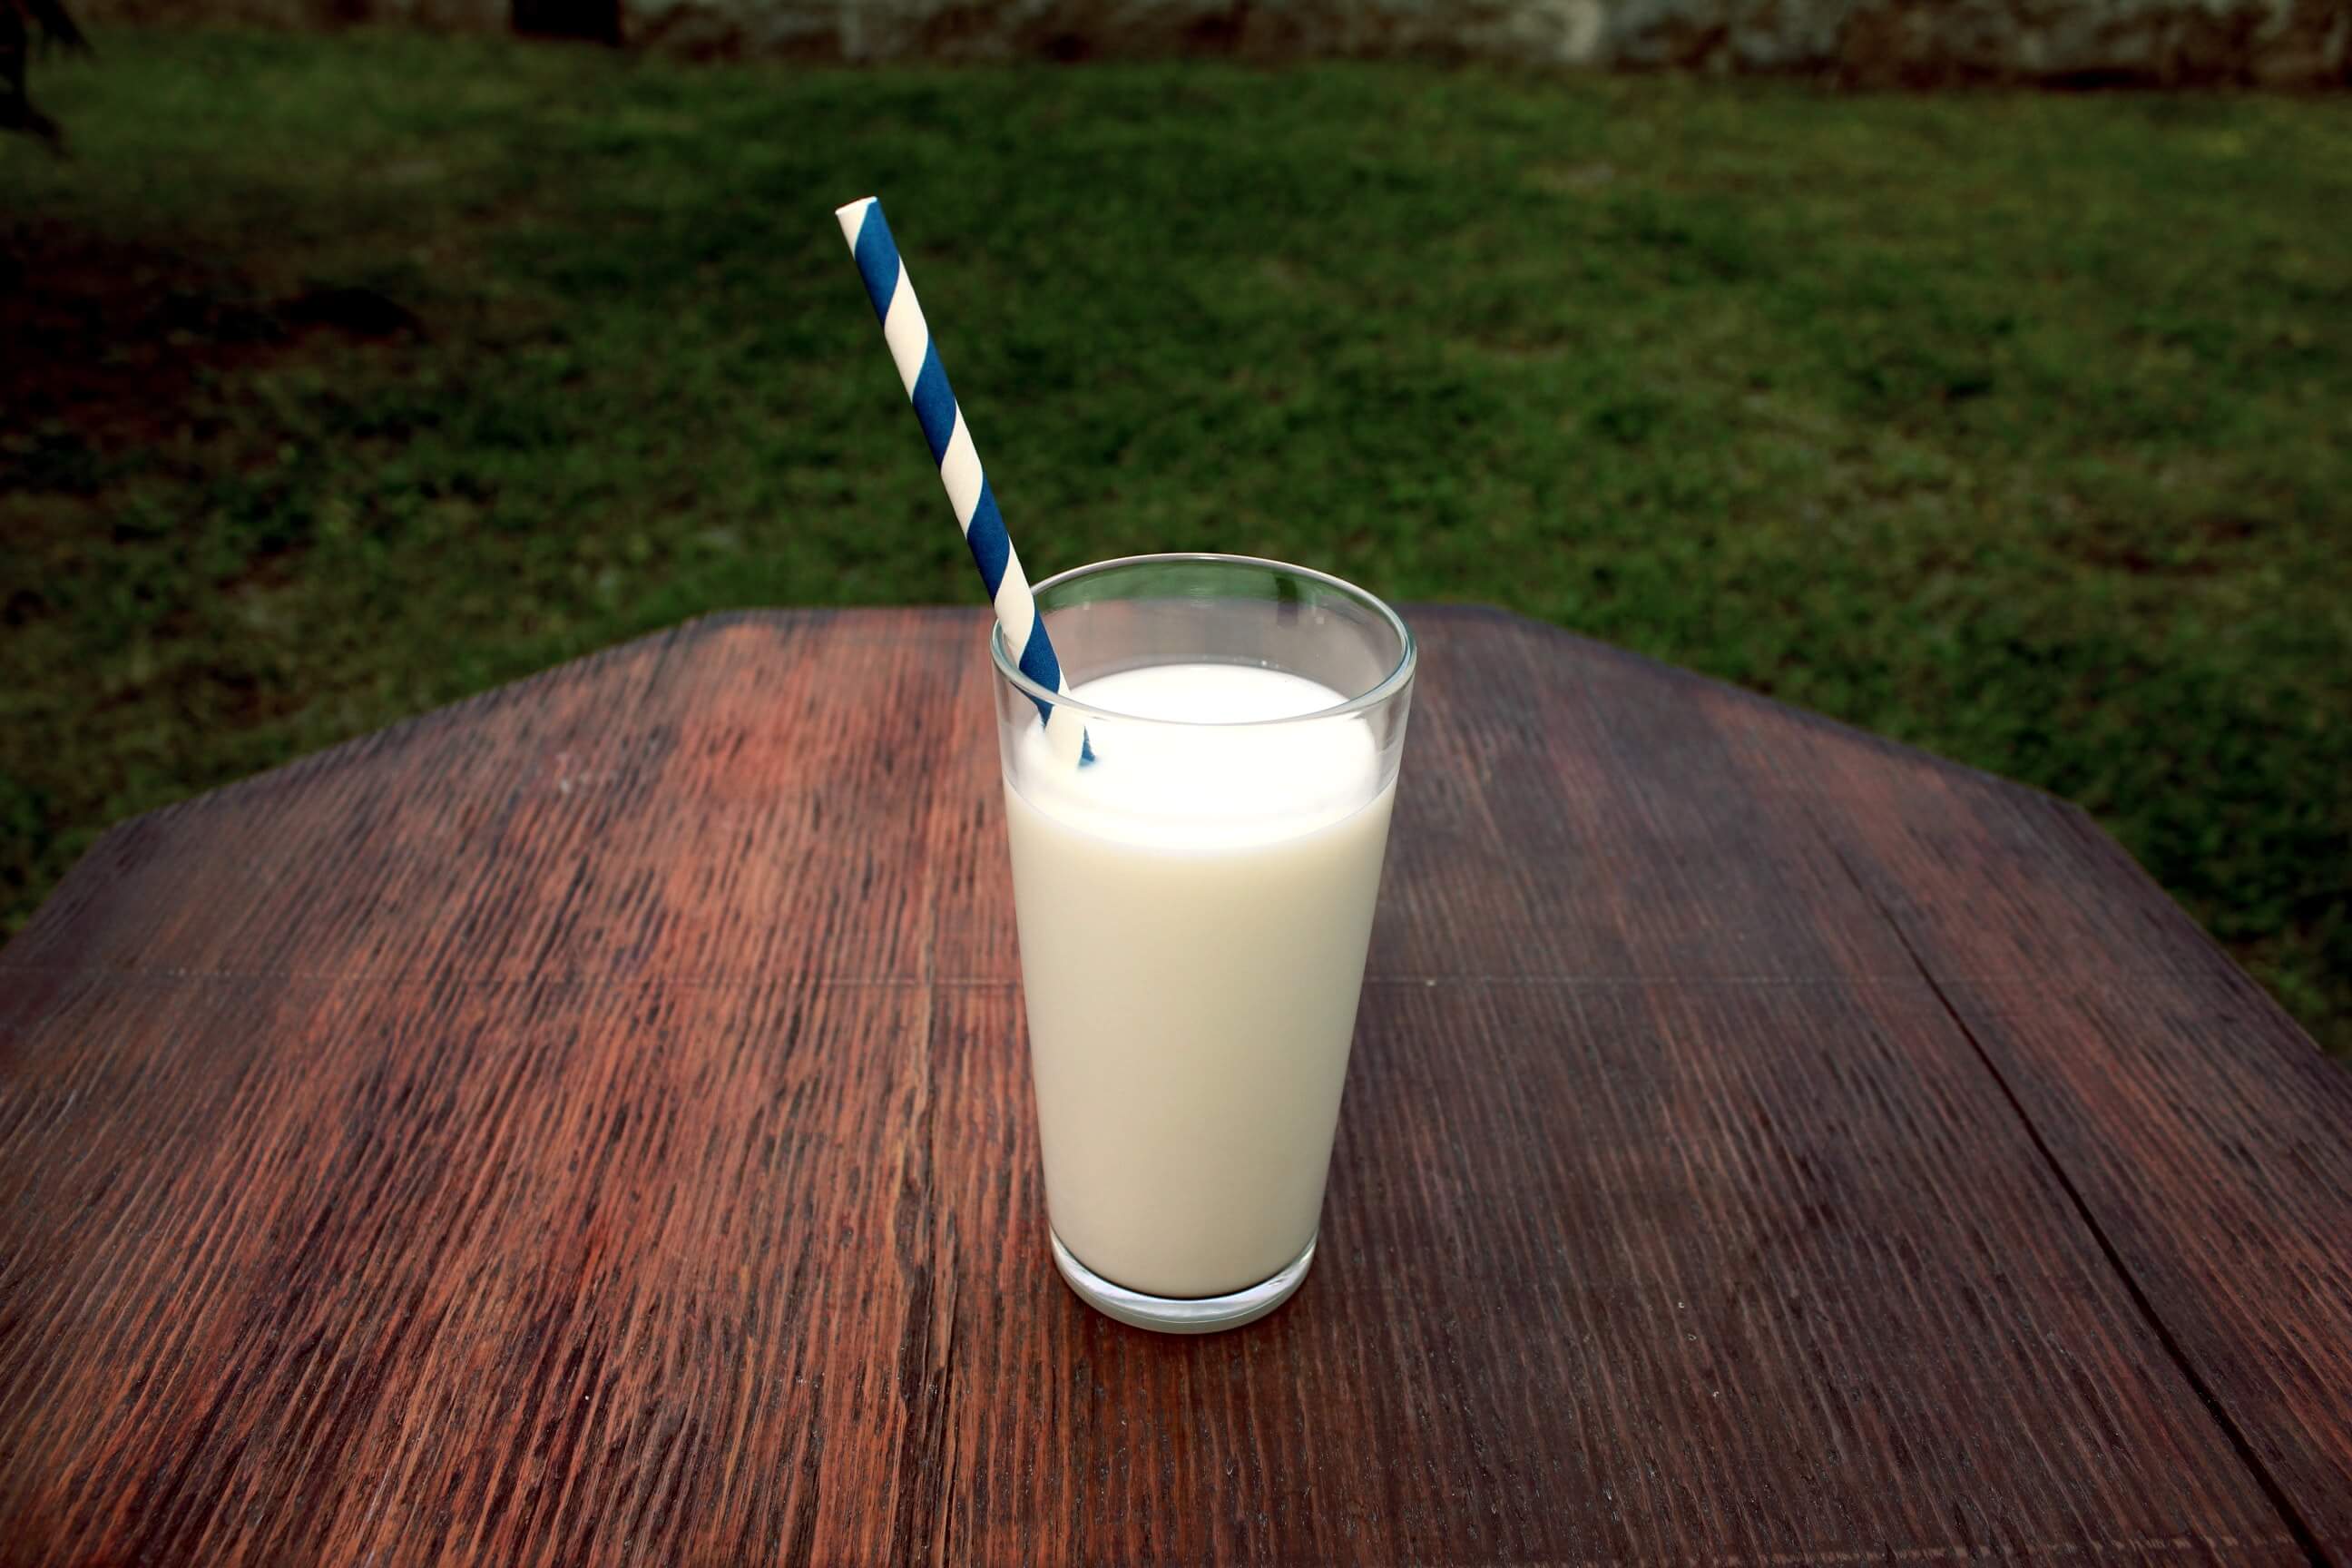 milk-in-a-glass-on-a-table-outdoors